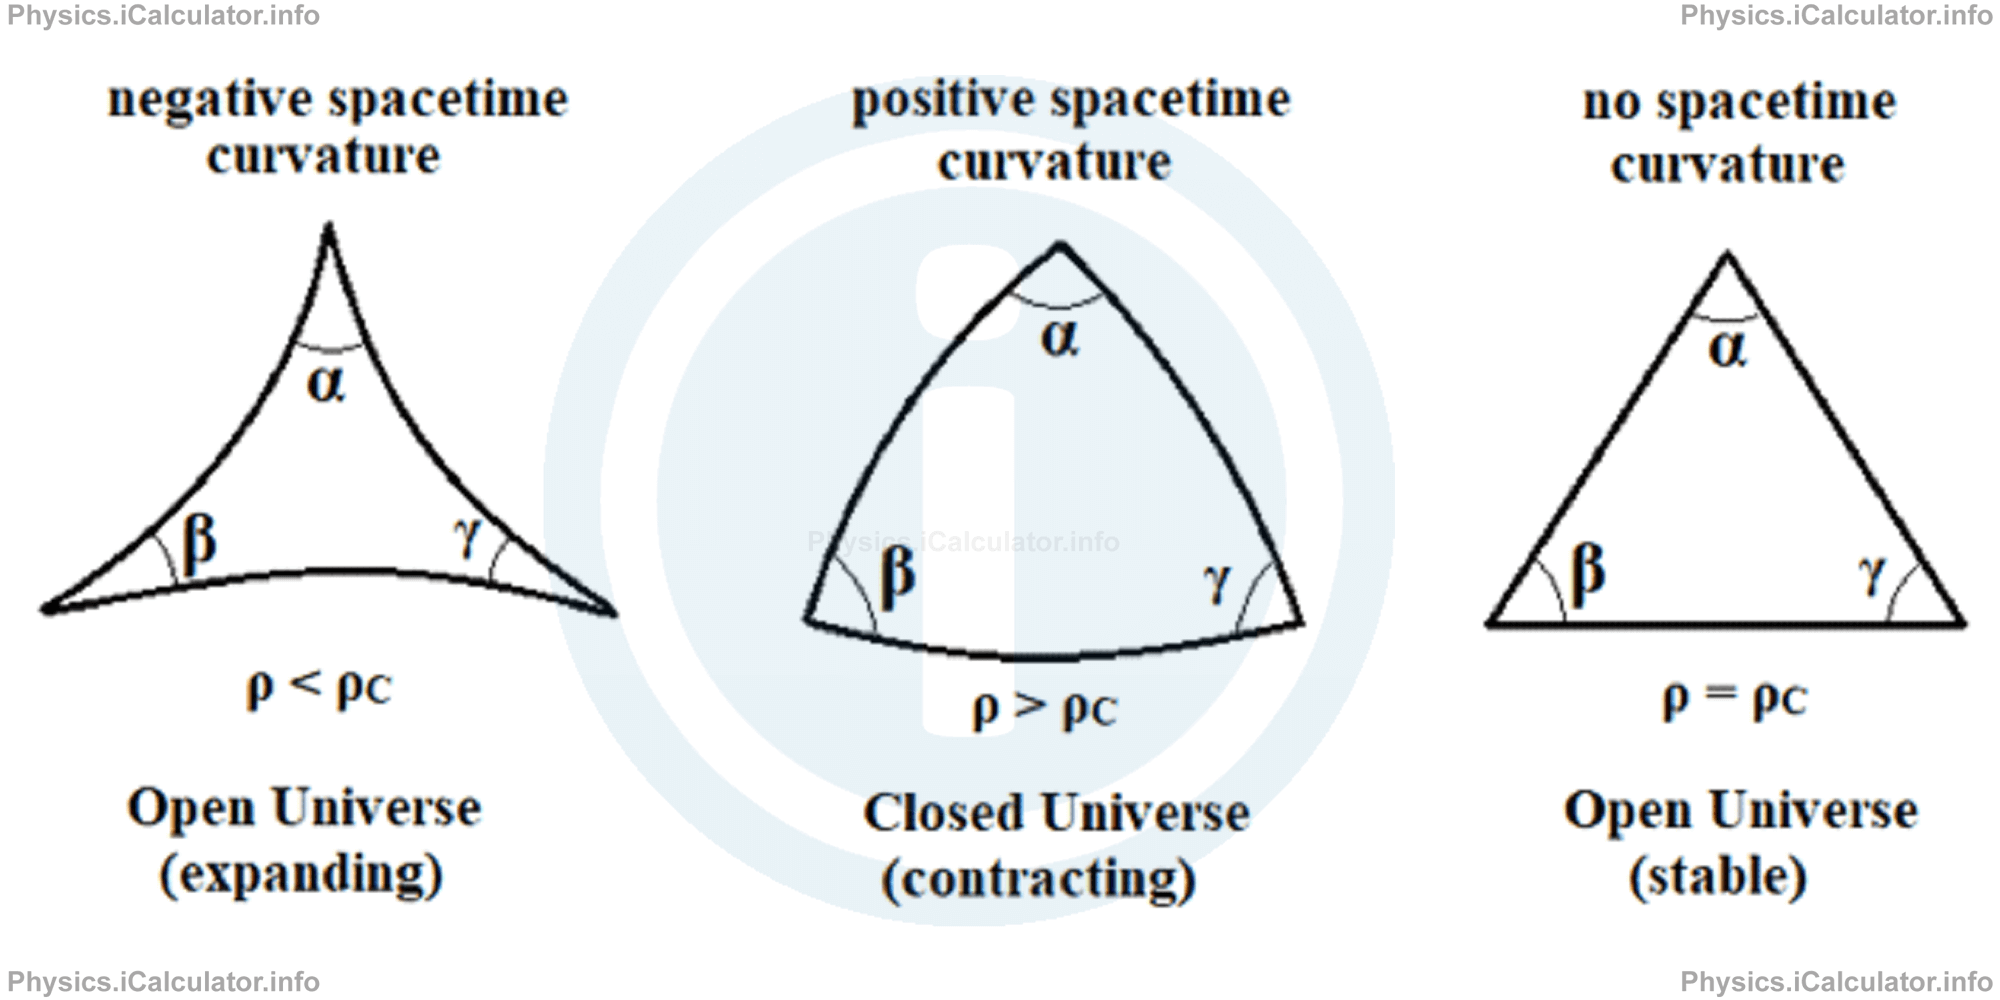 Physics Tutorials: This image provides visual information for the physics tutorial Expansion of the Universe 